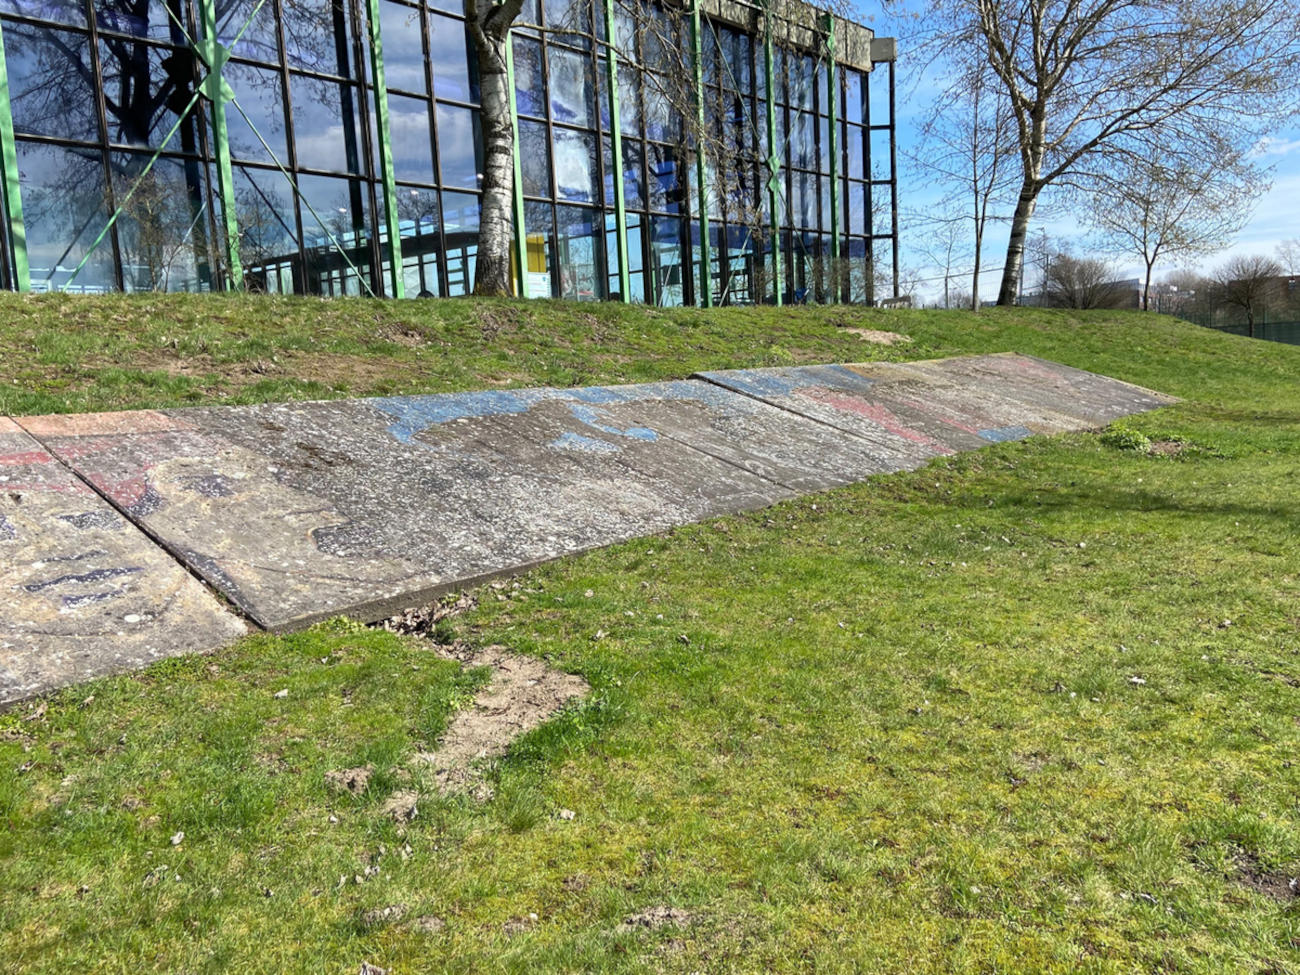 The painted concrete slabs lie between the University Pool and the SFG Building